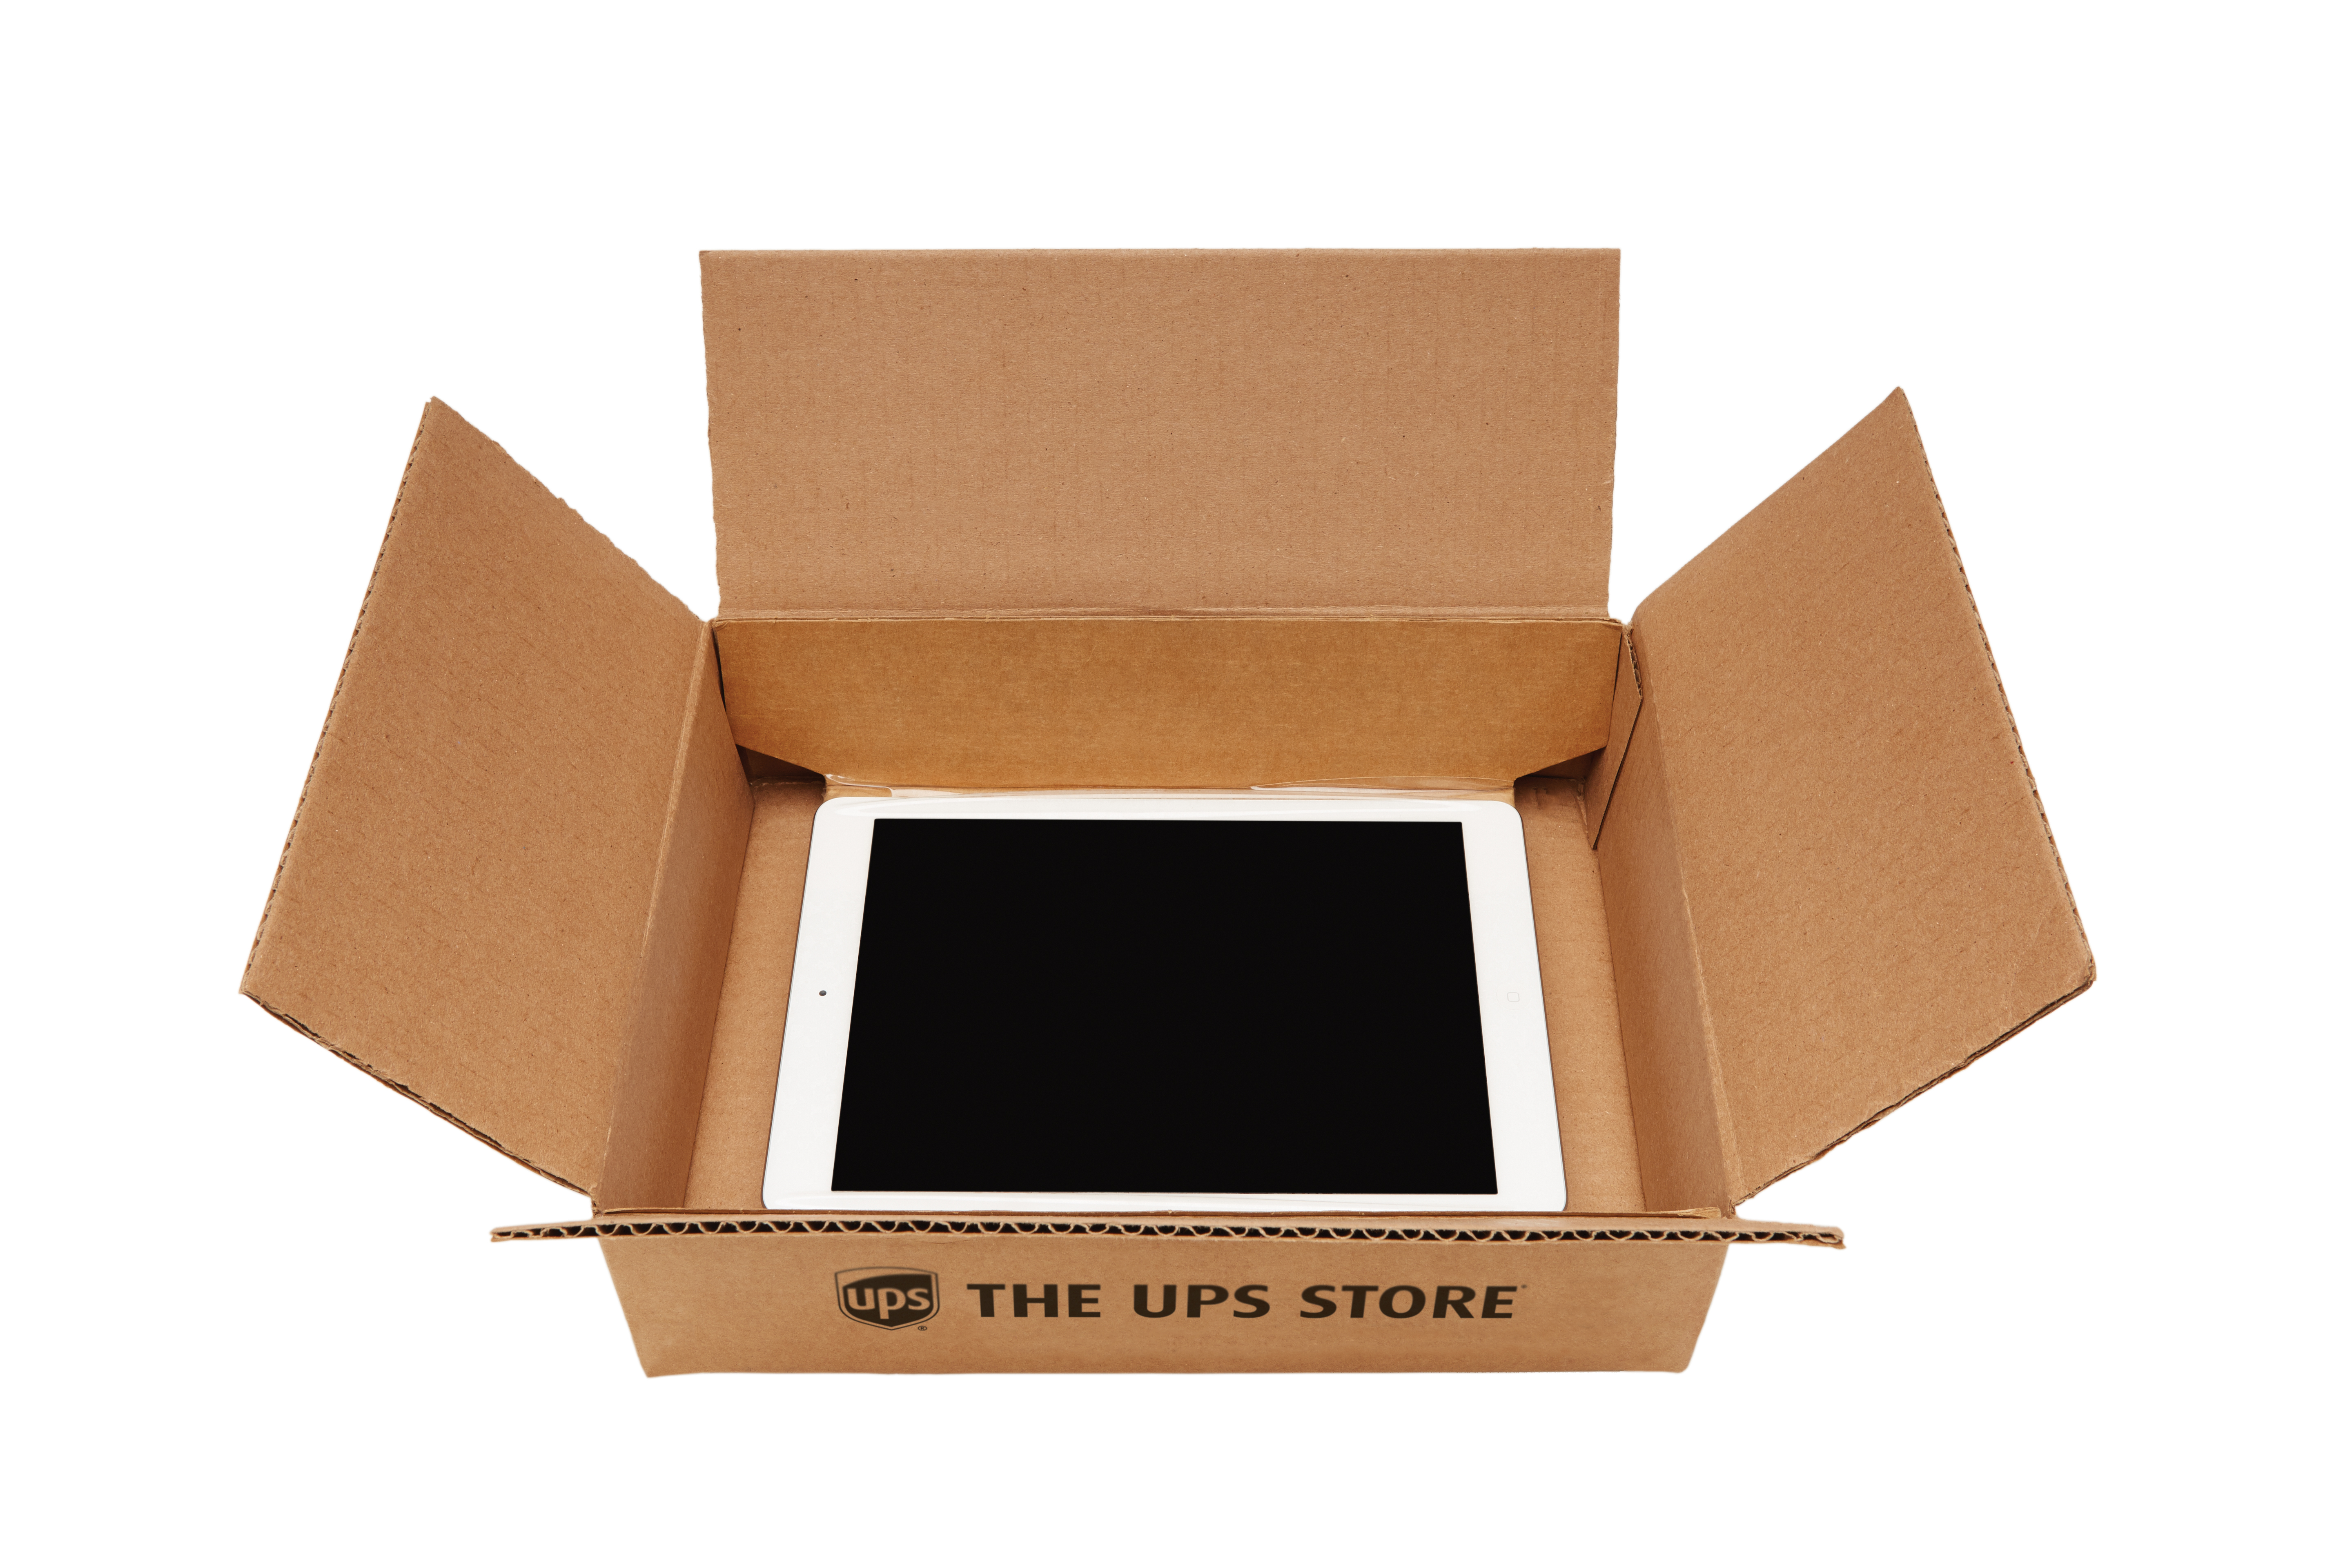 A tablet packed and suspended in a The UPS Store box.